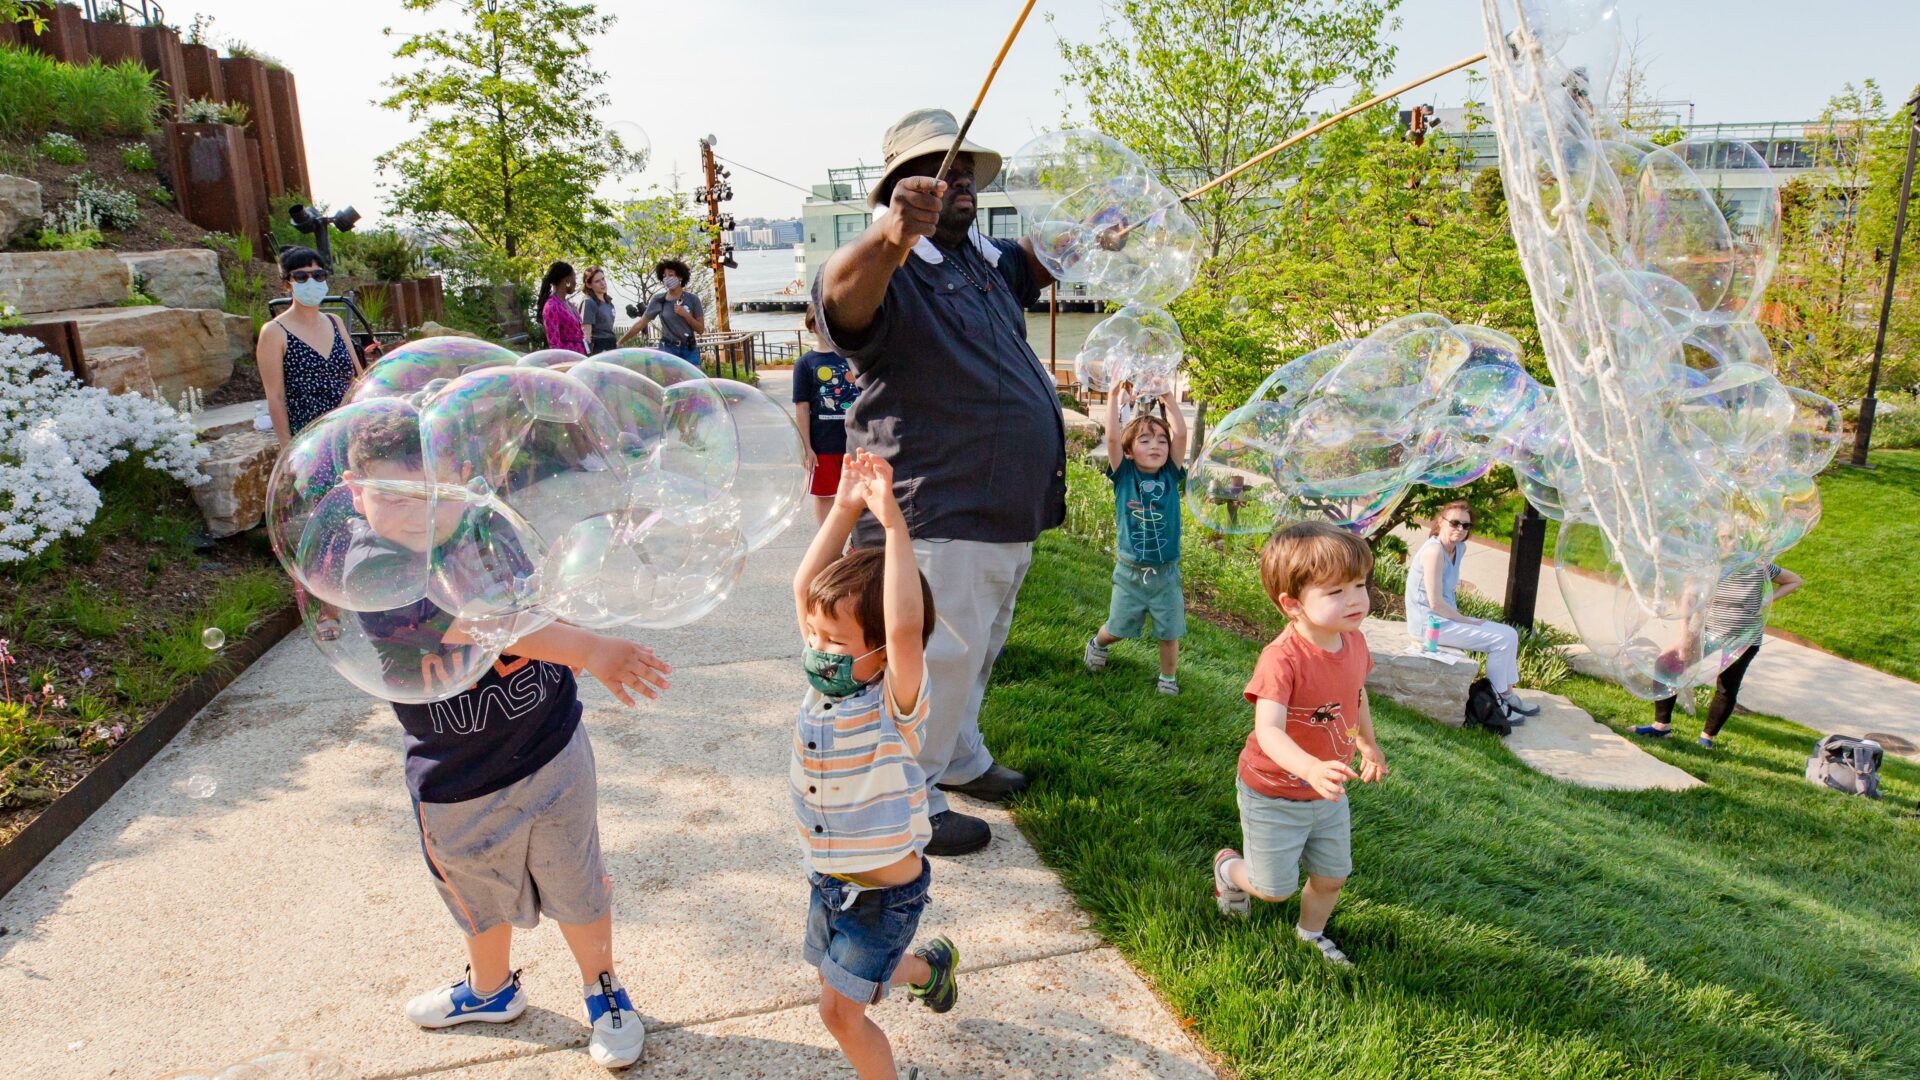 A man creates large bubbles while children frolick on the lawns